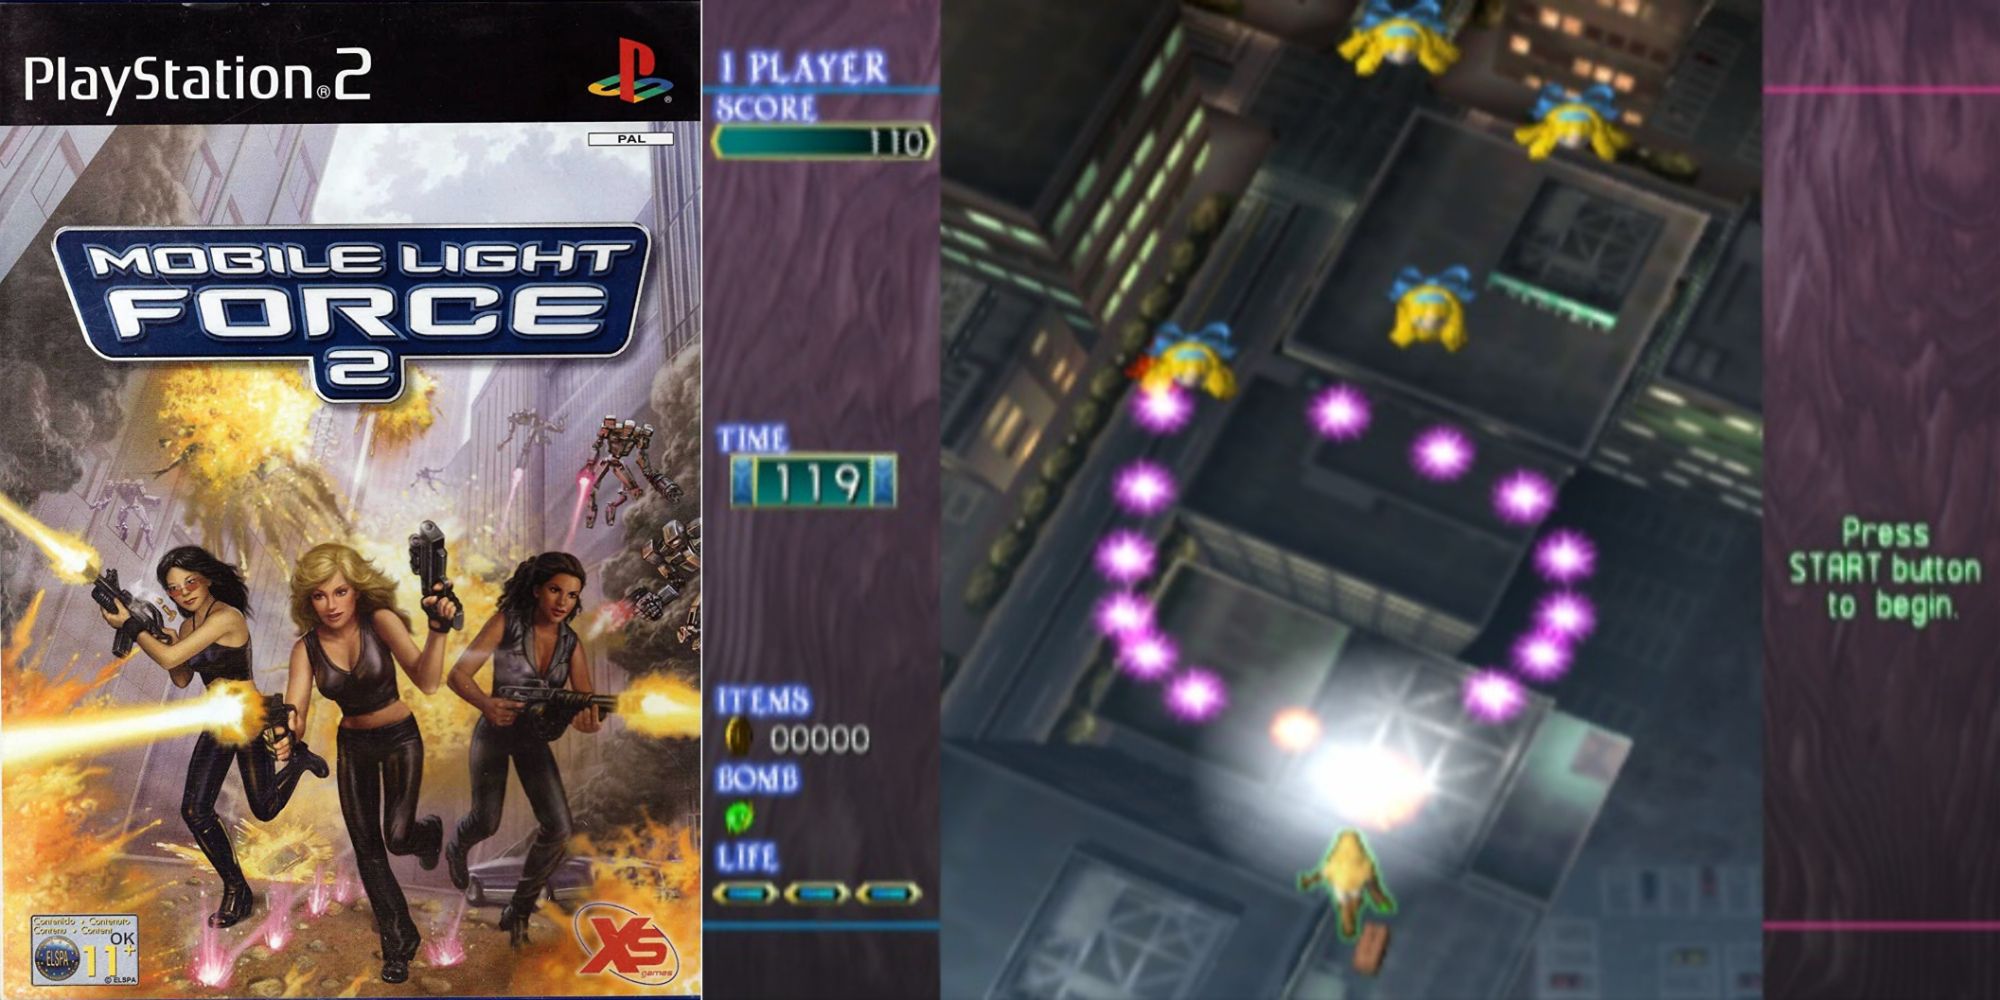 Mobile Light Force 2 cover art and a screenshot of the game.